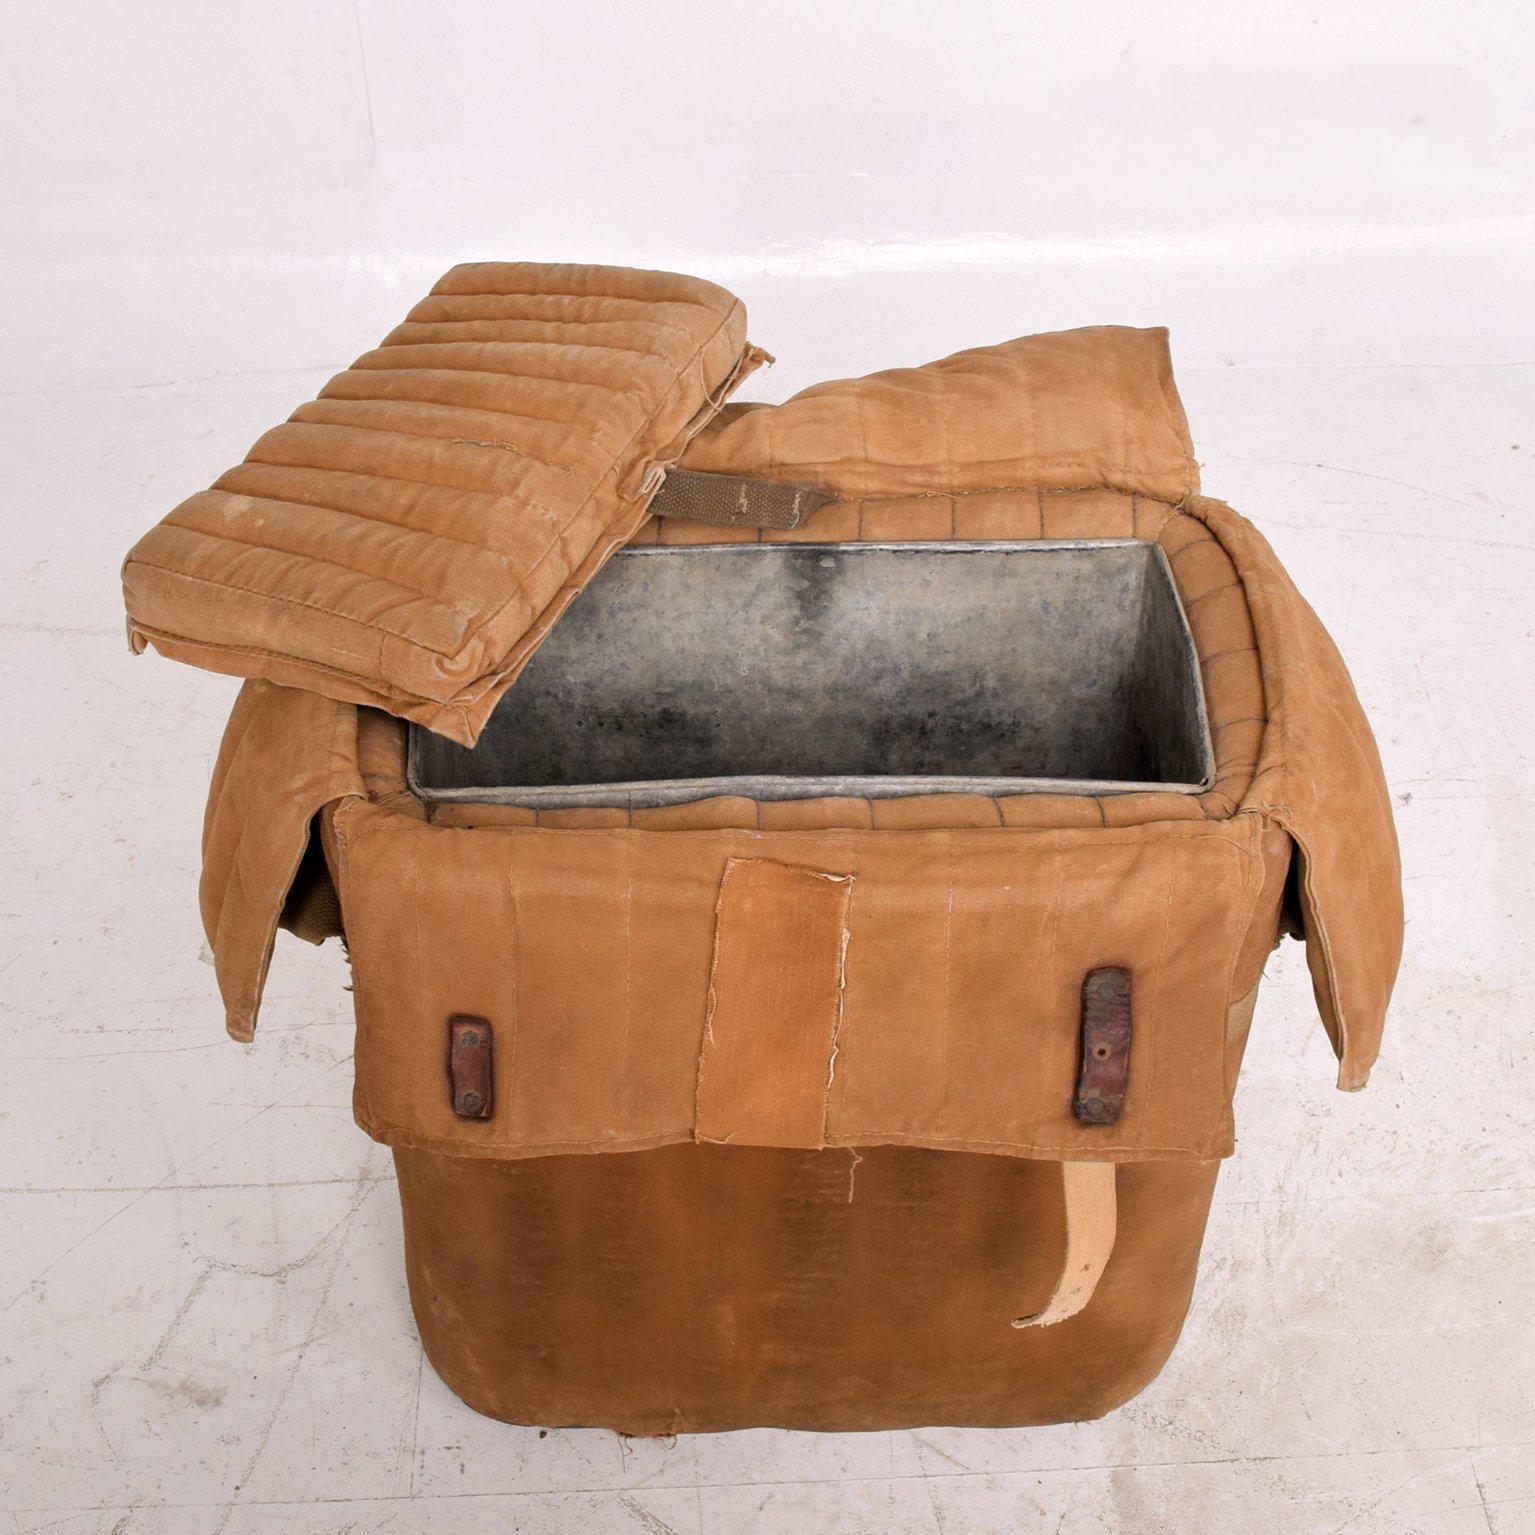 American Distressed Military Surplus Industrial Ice Cooler Tote Chest 1940s US Army